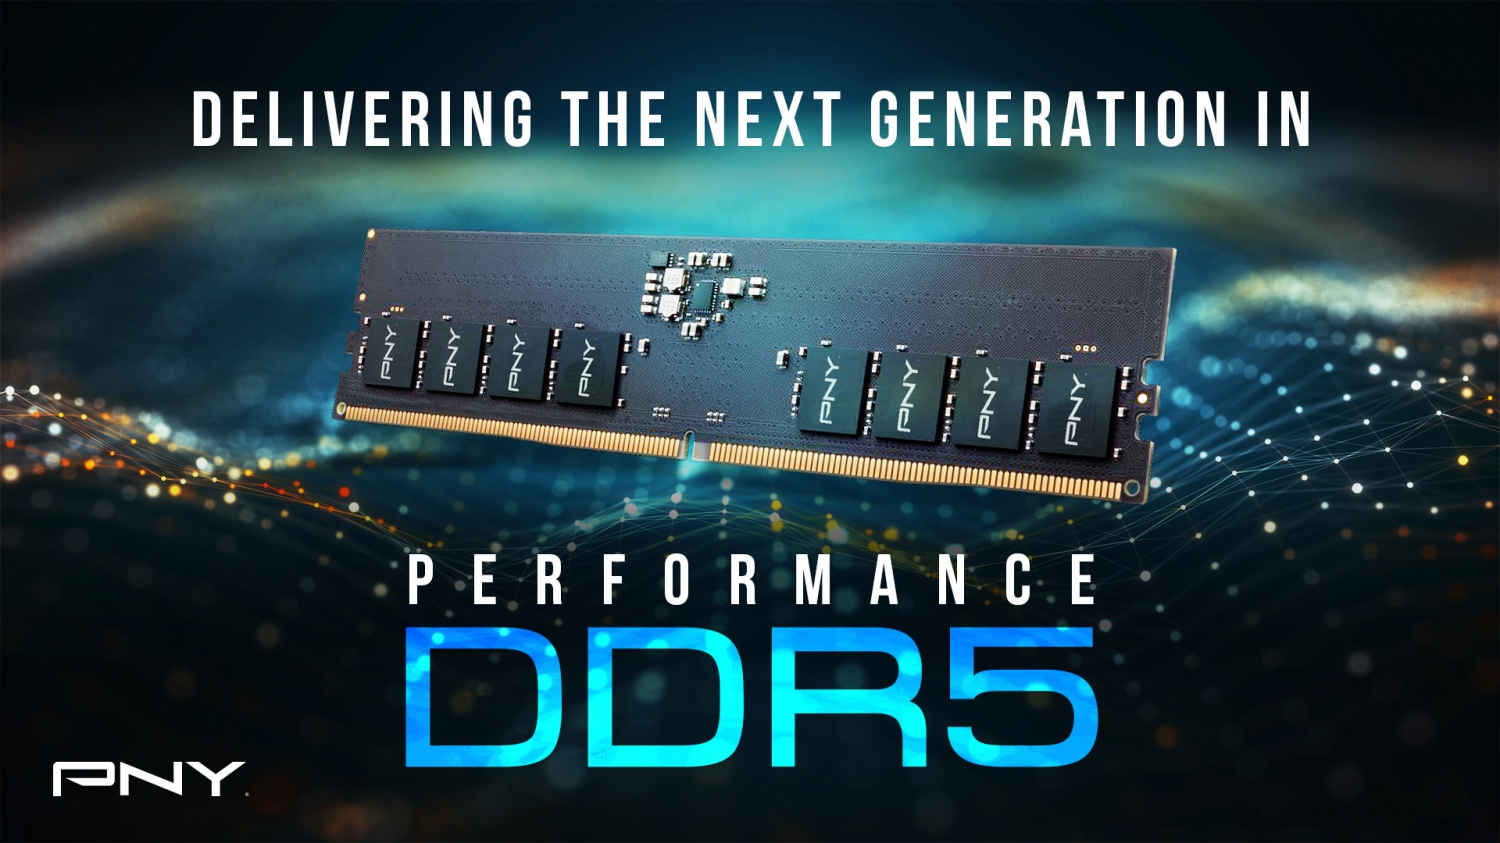 ZADAK Spark DDR5 memory announced, up to 32GB and 7200 MHz